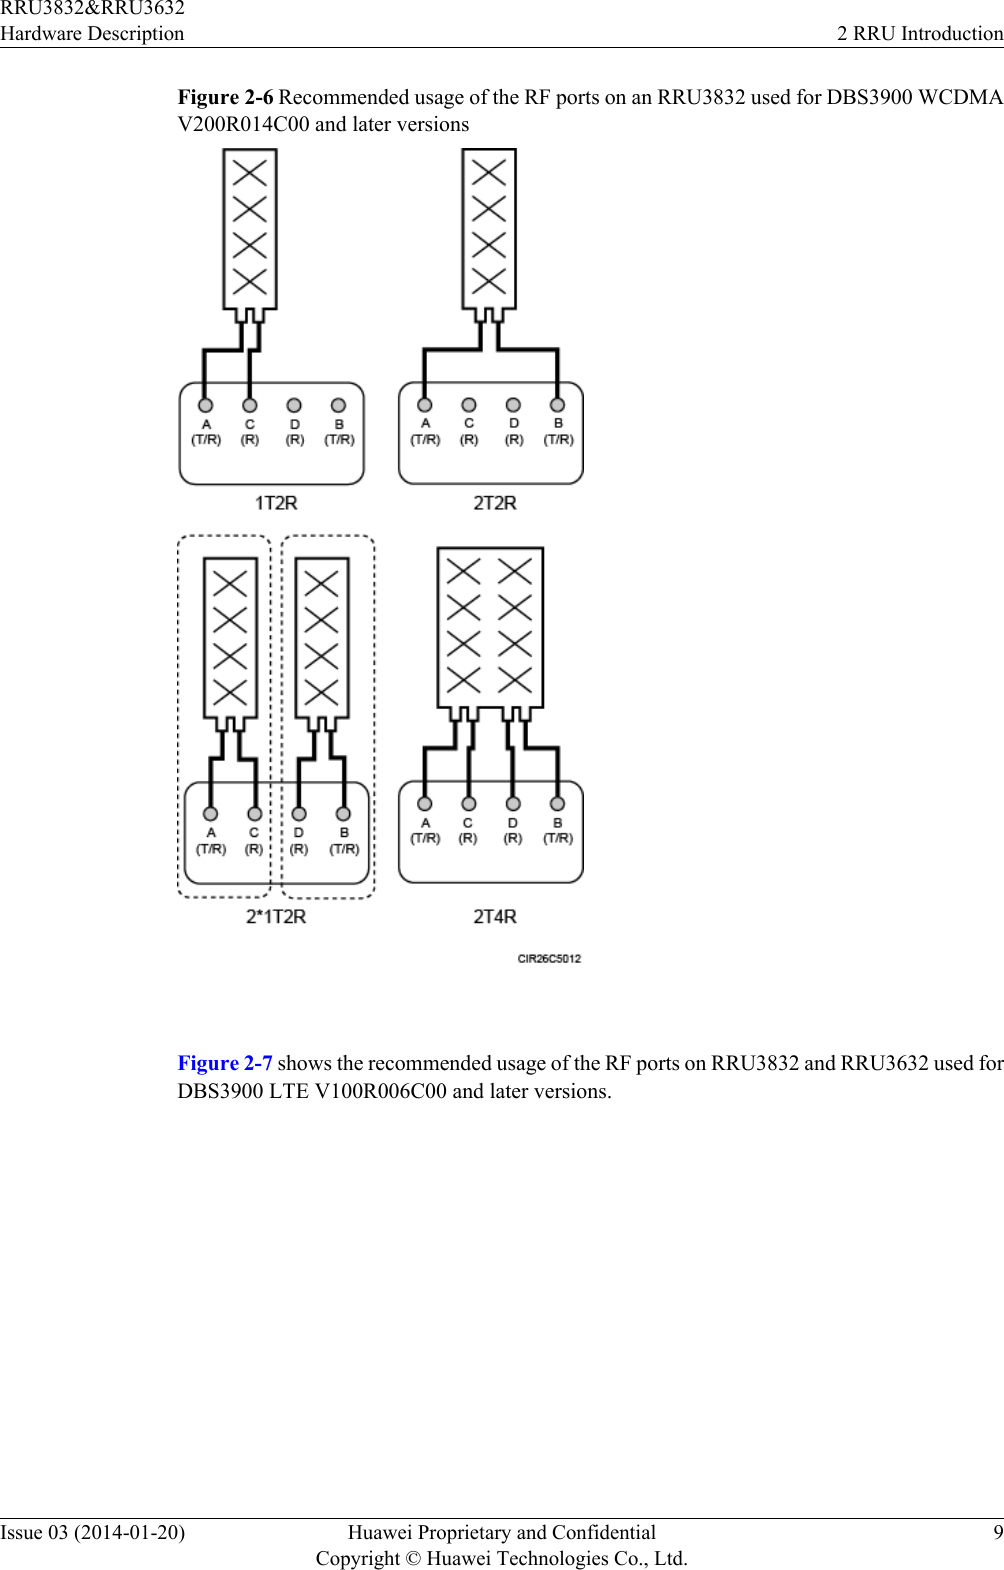 Figure 2-6 Recommended usage of the RF ports on an RRU3832 used for DBS3900 WCDMAV200R014C00 and later versions Figure 2-7 shows the recommended usage of the RF ports on RRU3832 and RRU3632 used forDBS3900 LTE V100R006C00 and later versions.RRU3832&amp;RRU3632Hardware Description 2 RRU IntroductionIssue 03 (2014-01-20) Huawei Proprietary and ConfidentialCopyright © Huawei Technologies Co., Ltd.9